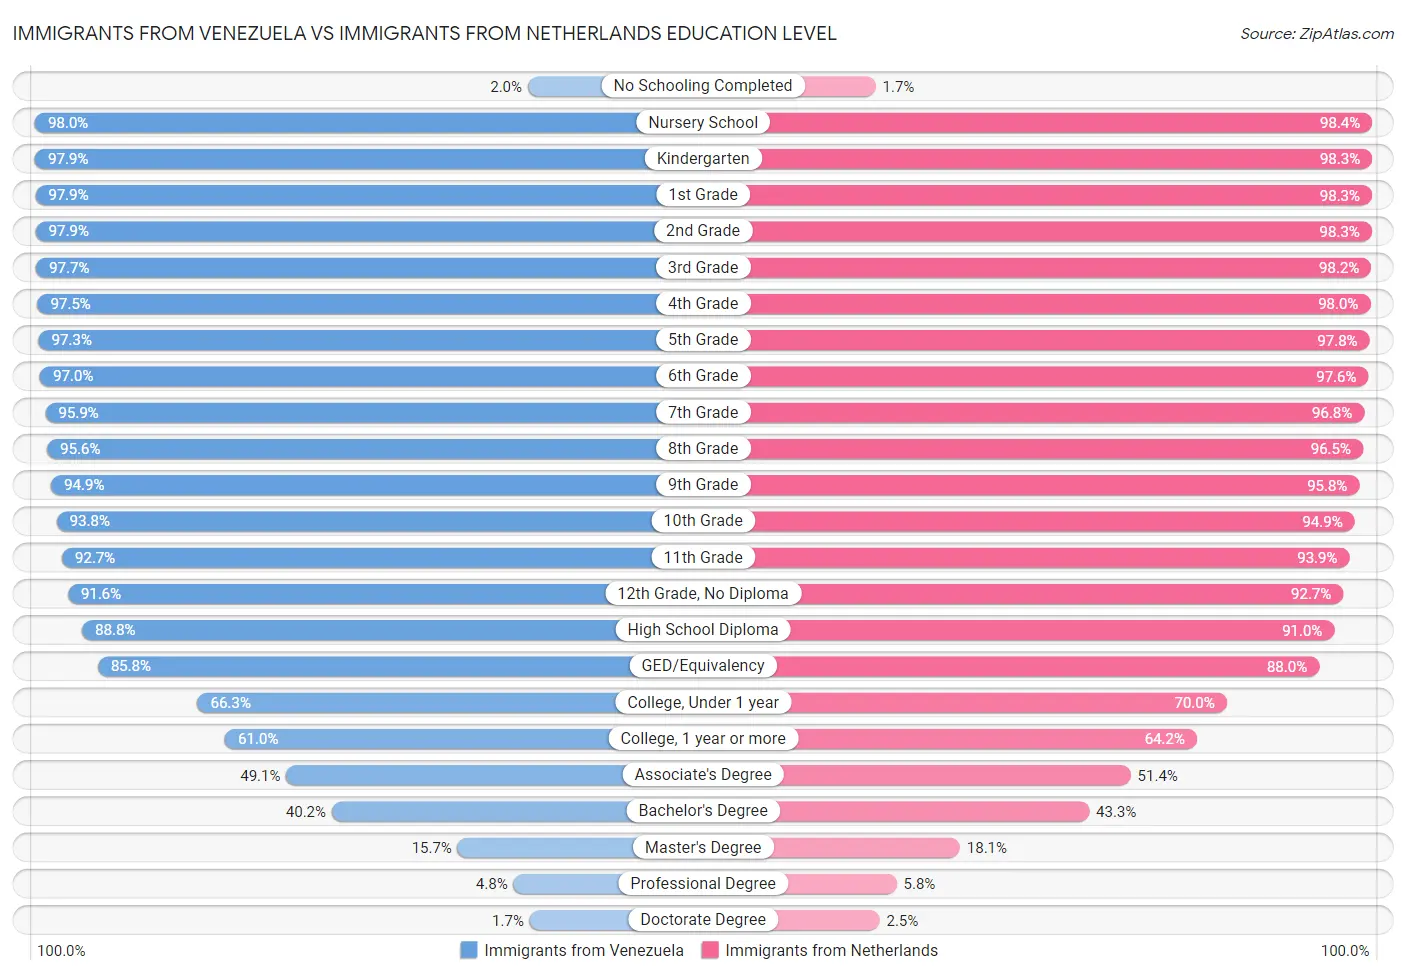 Immigrants from Venezuela vs Immigrants from Netherlands Education Level